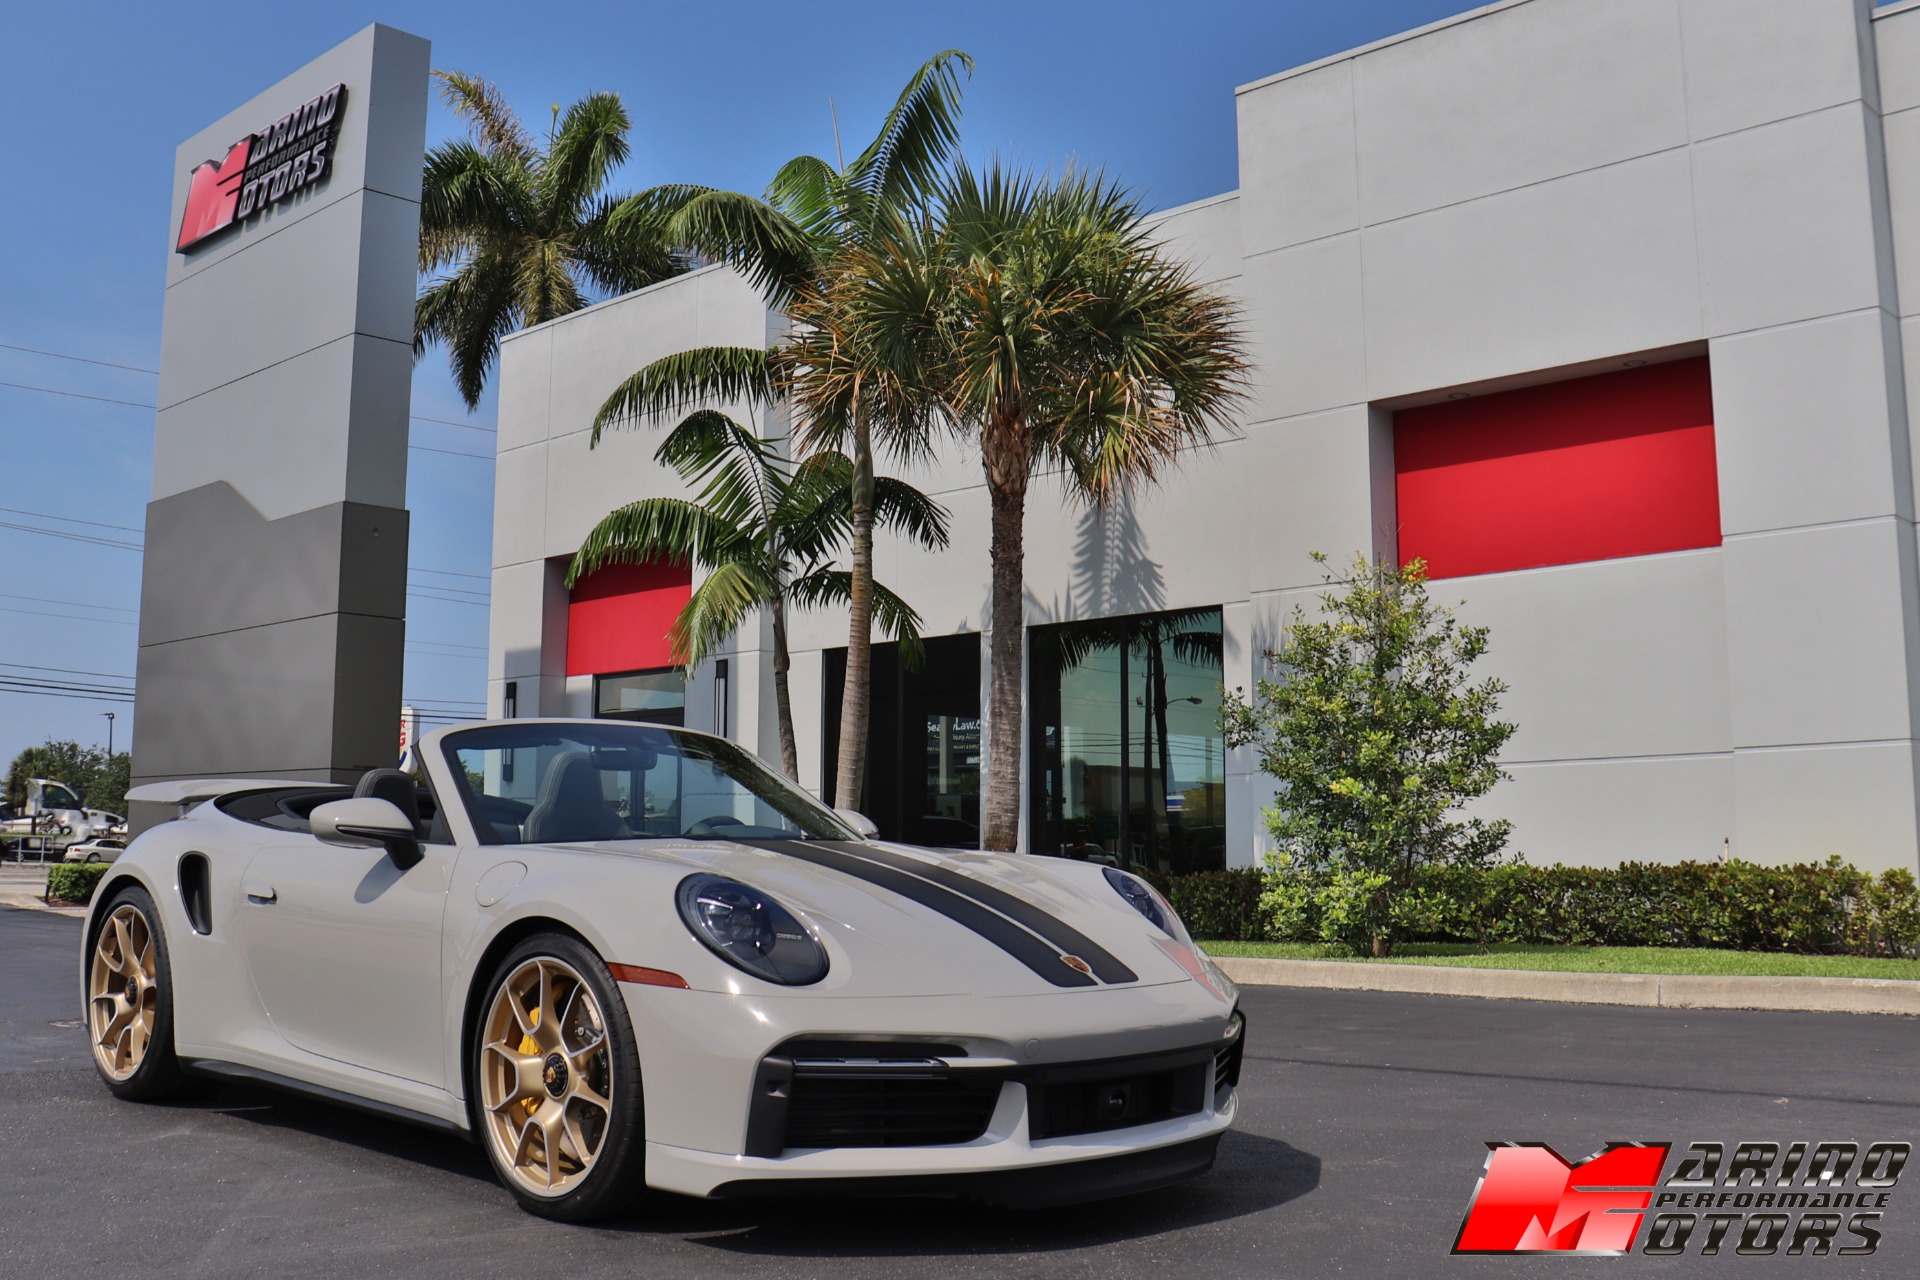 Used 2022 Porsche 911 Turbo S Cabriolet How to Pick the Best Florida Car Dealerships